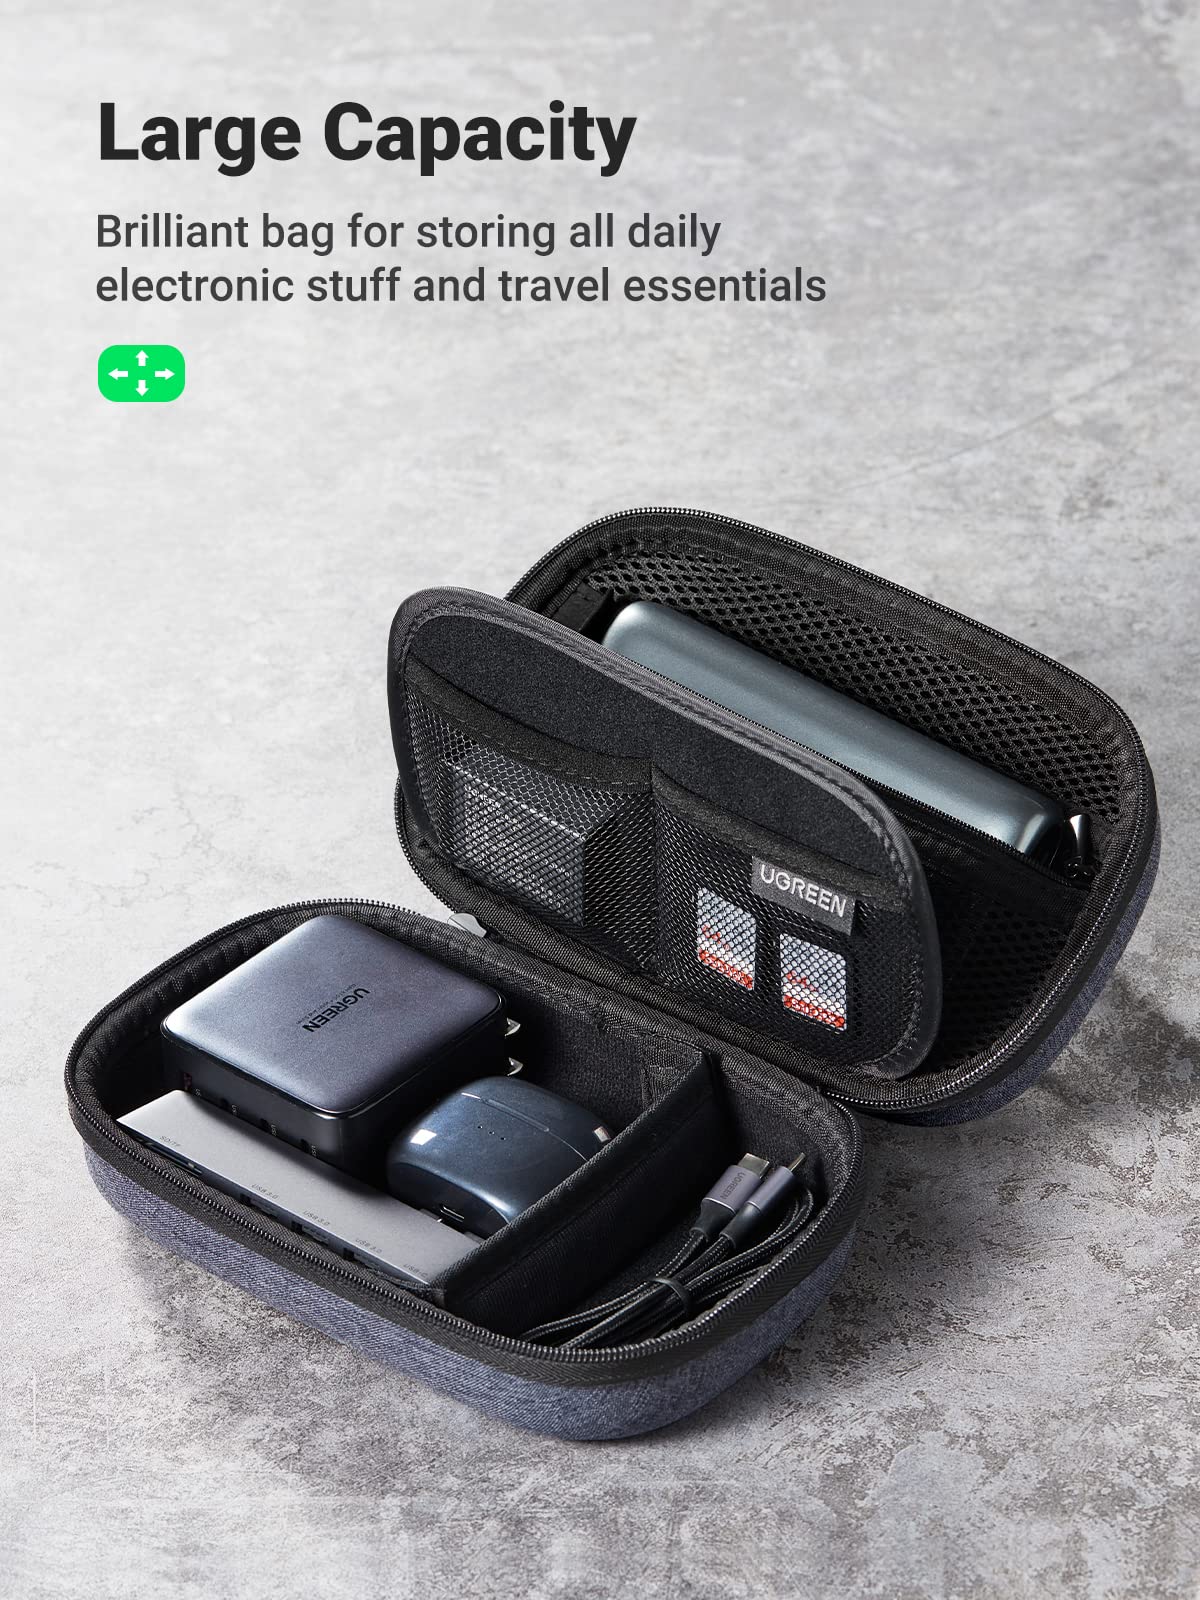 UGREEN Travel Accessories, Portable Cable Organiser Bag Travel Electronics Organiser Small Gadget Cable Bag Cable Pouch, Hard Case for Cable Charger Adapter Power Bank Hard Drive SD Card